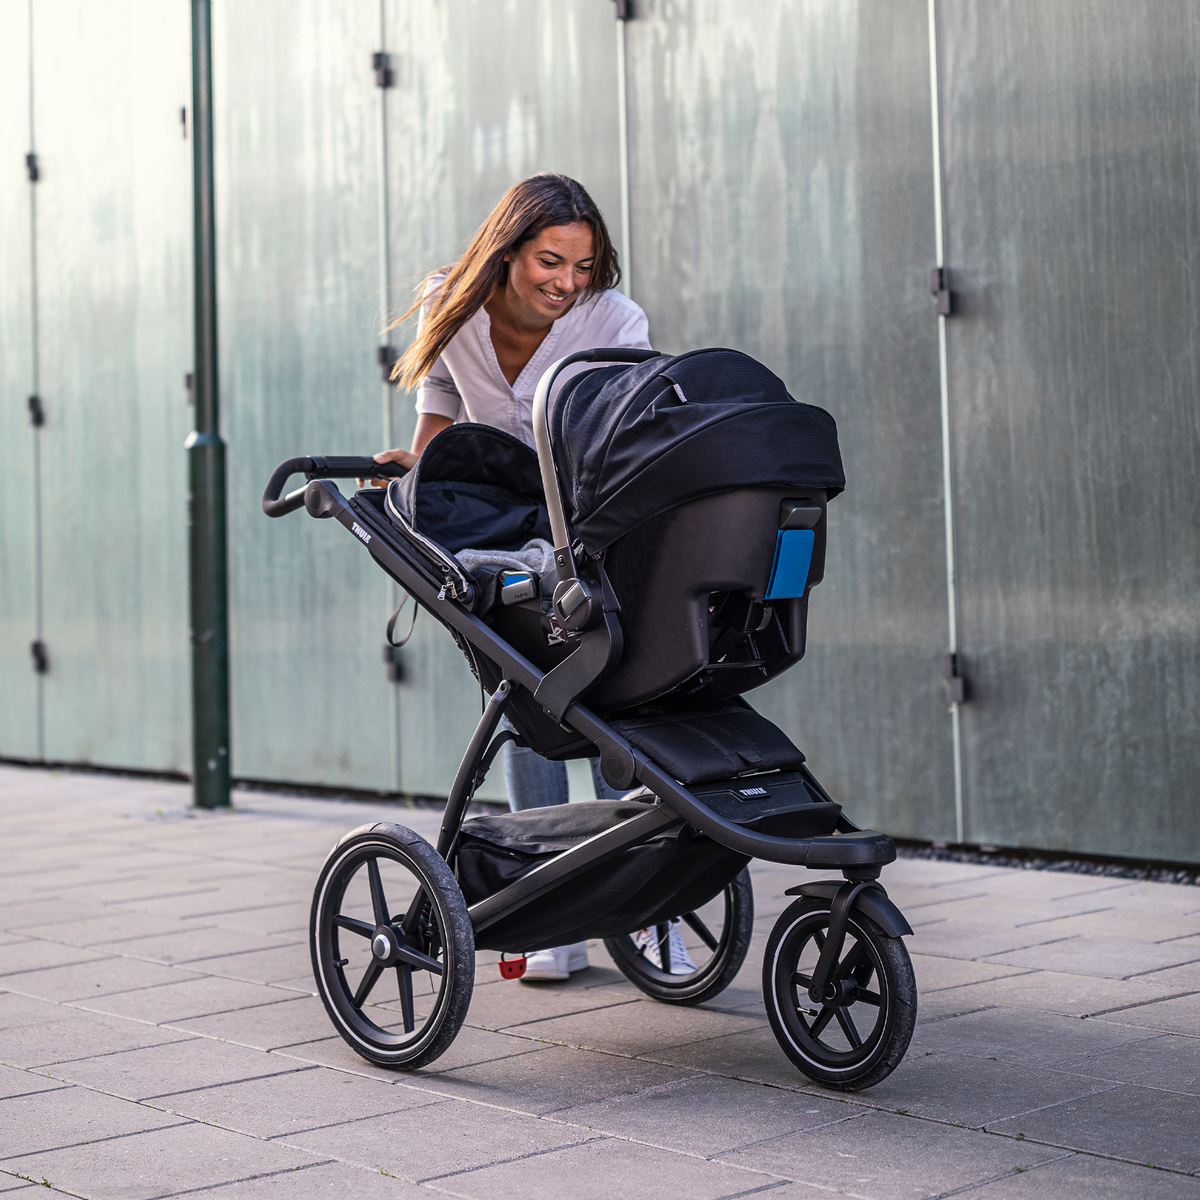 A woman tends to her baby in a black car seat thanks to the Thule Urban Glide 2 Car Seat Adapter.